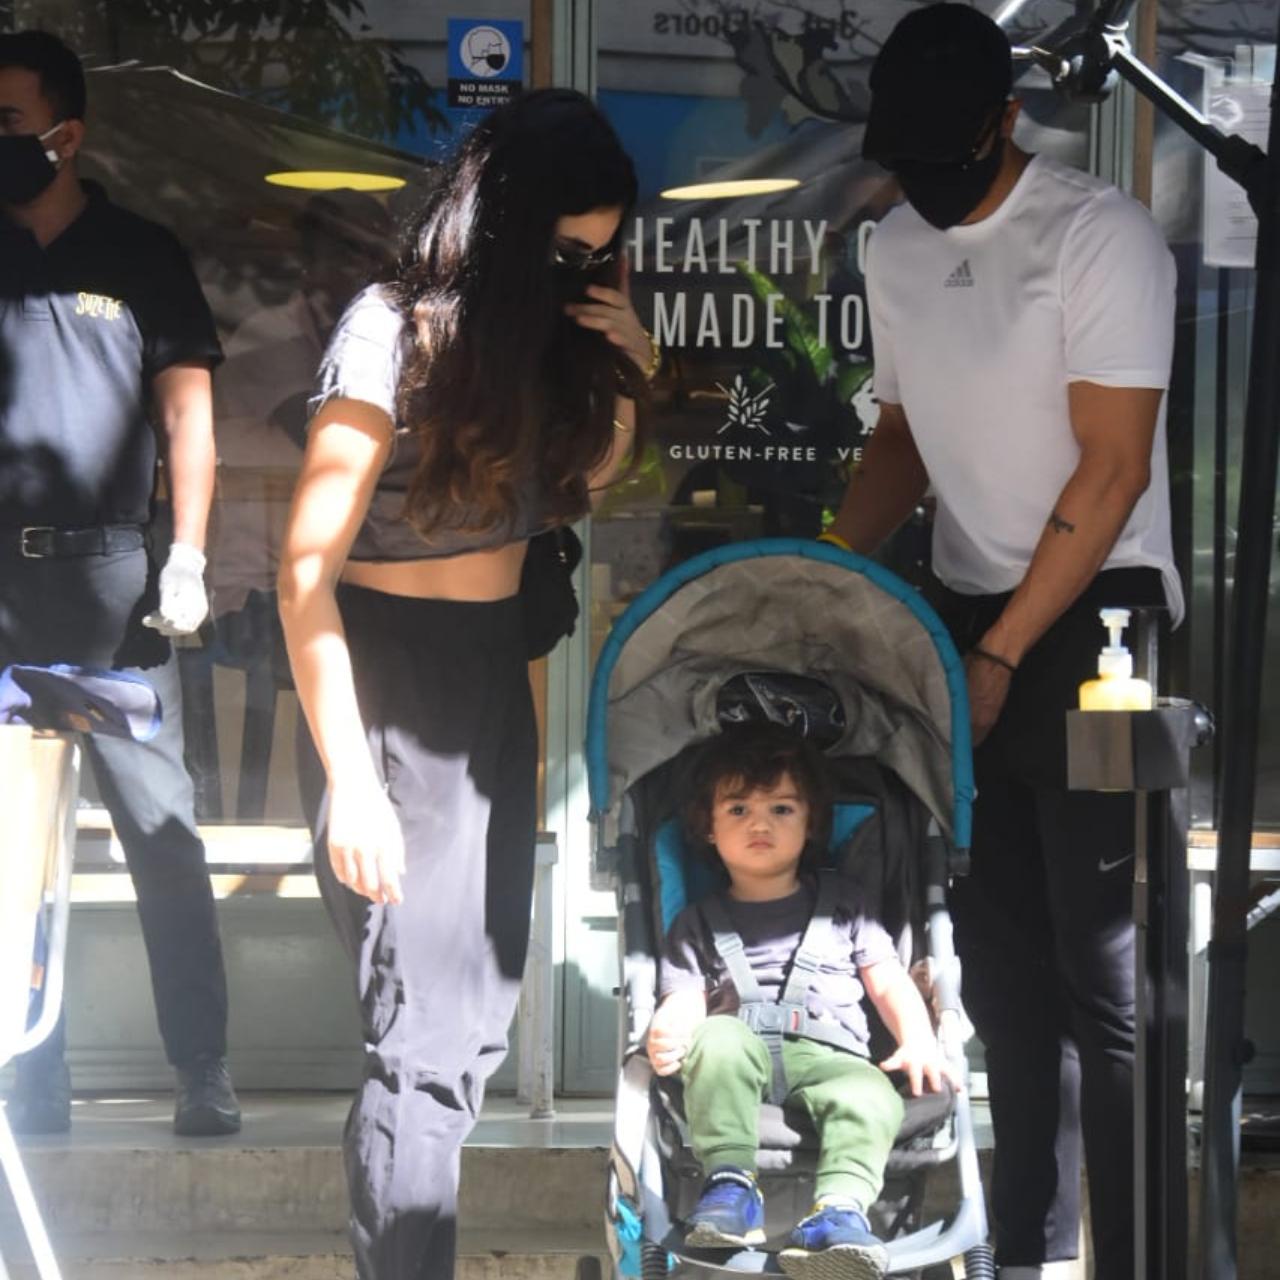 Arjun Rampal and Gabriella Demetriades, the It couple of B-town, was blessed with a baby boy in 2018, whom they named Arik. The year-old toddler was clicked enjoying his day out with his doting parents in the suburbs of Mumbai. (All pictures: Yogen Shah).